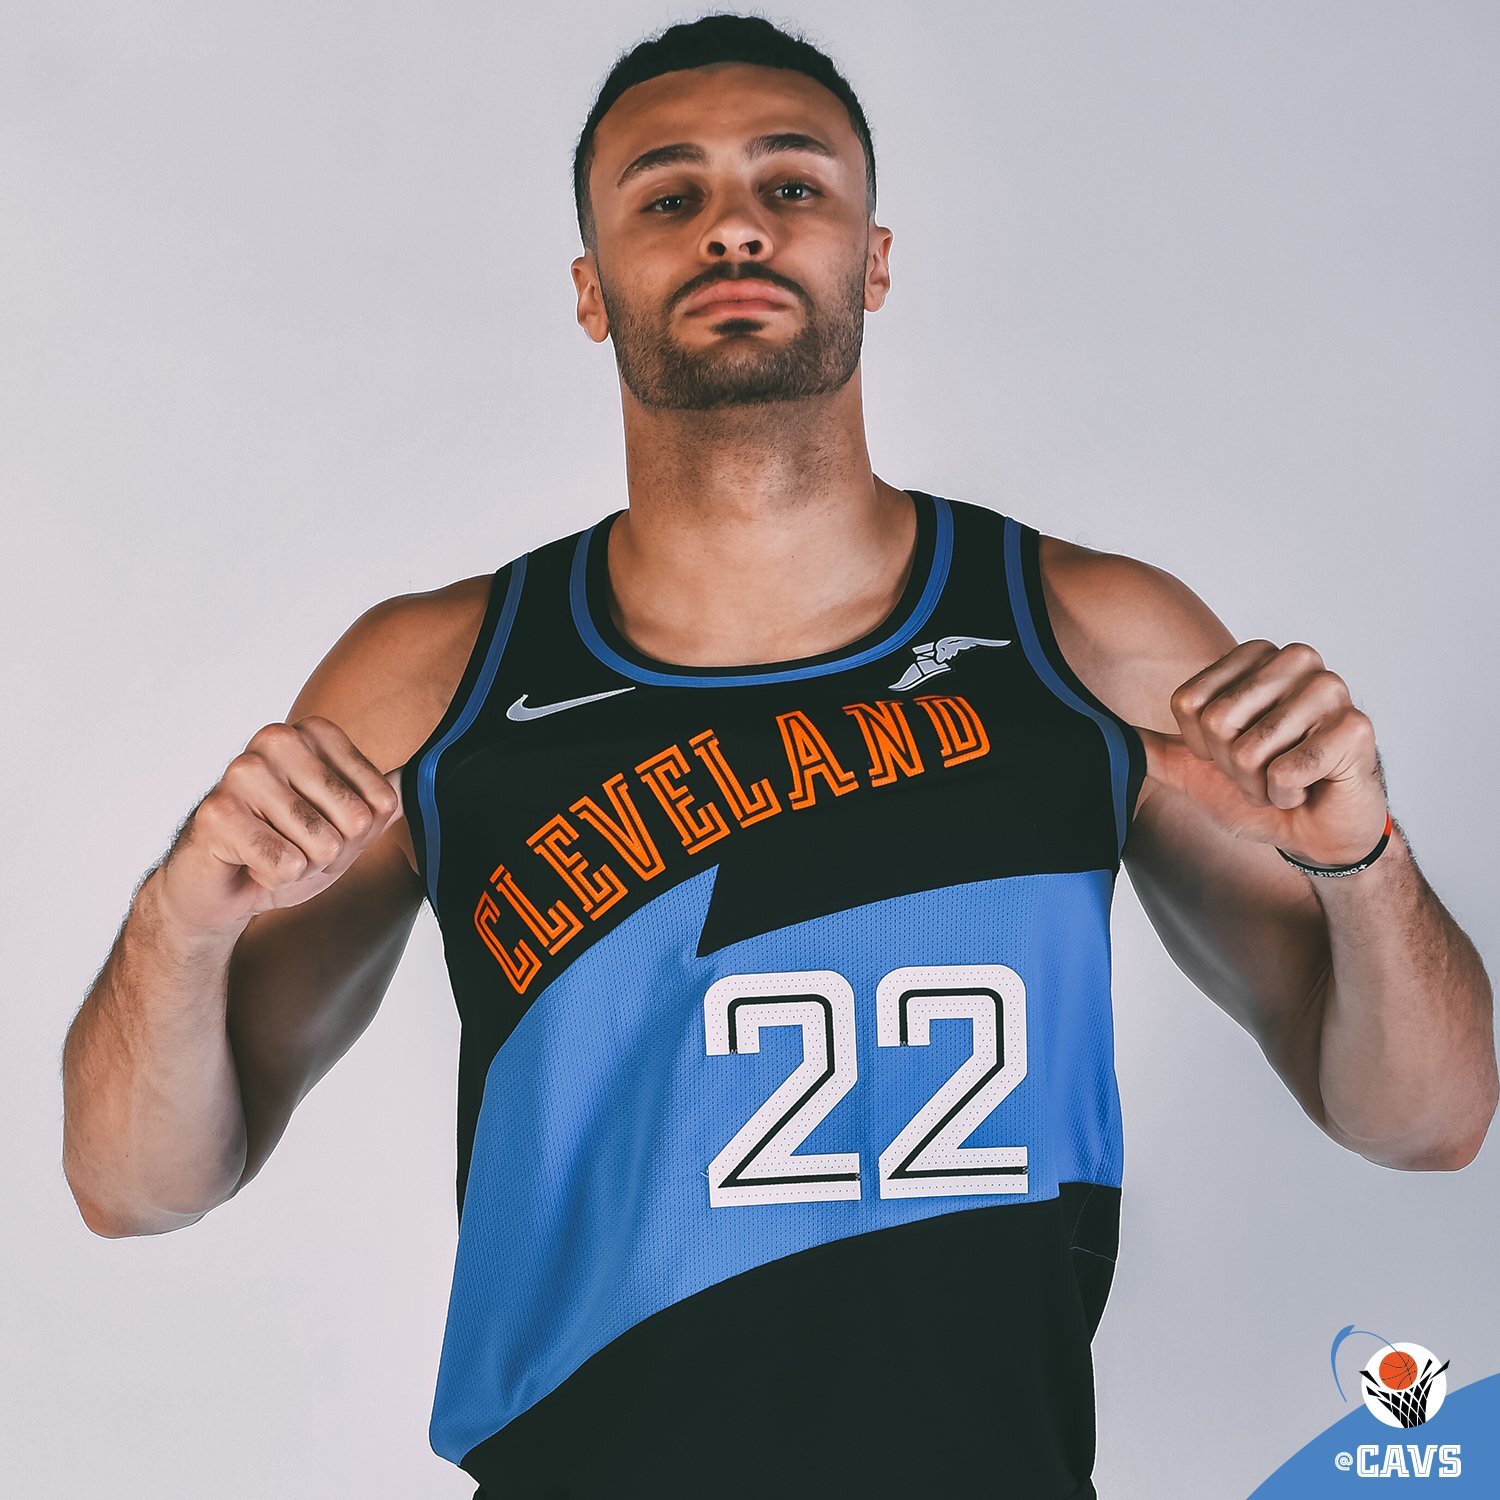 Cleveland Cavaliers 2019-20 City Edition uniform pays homage to